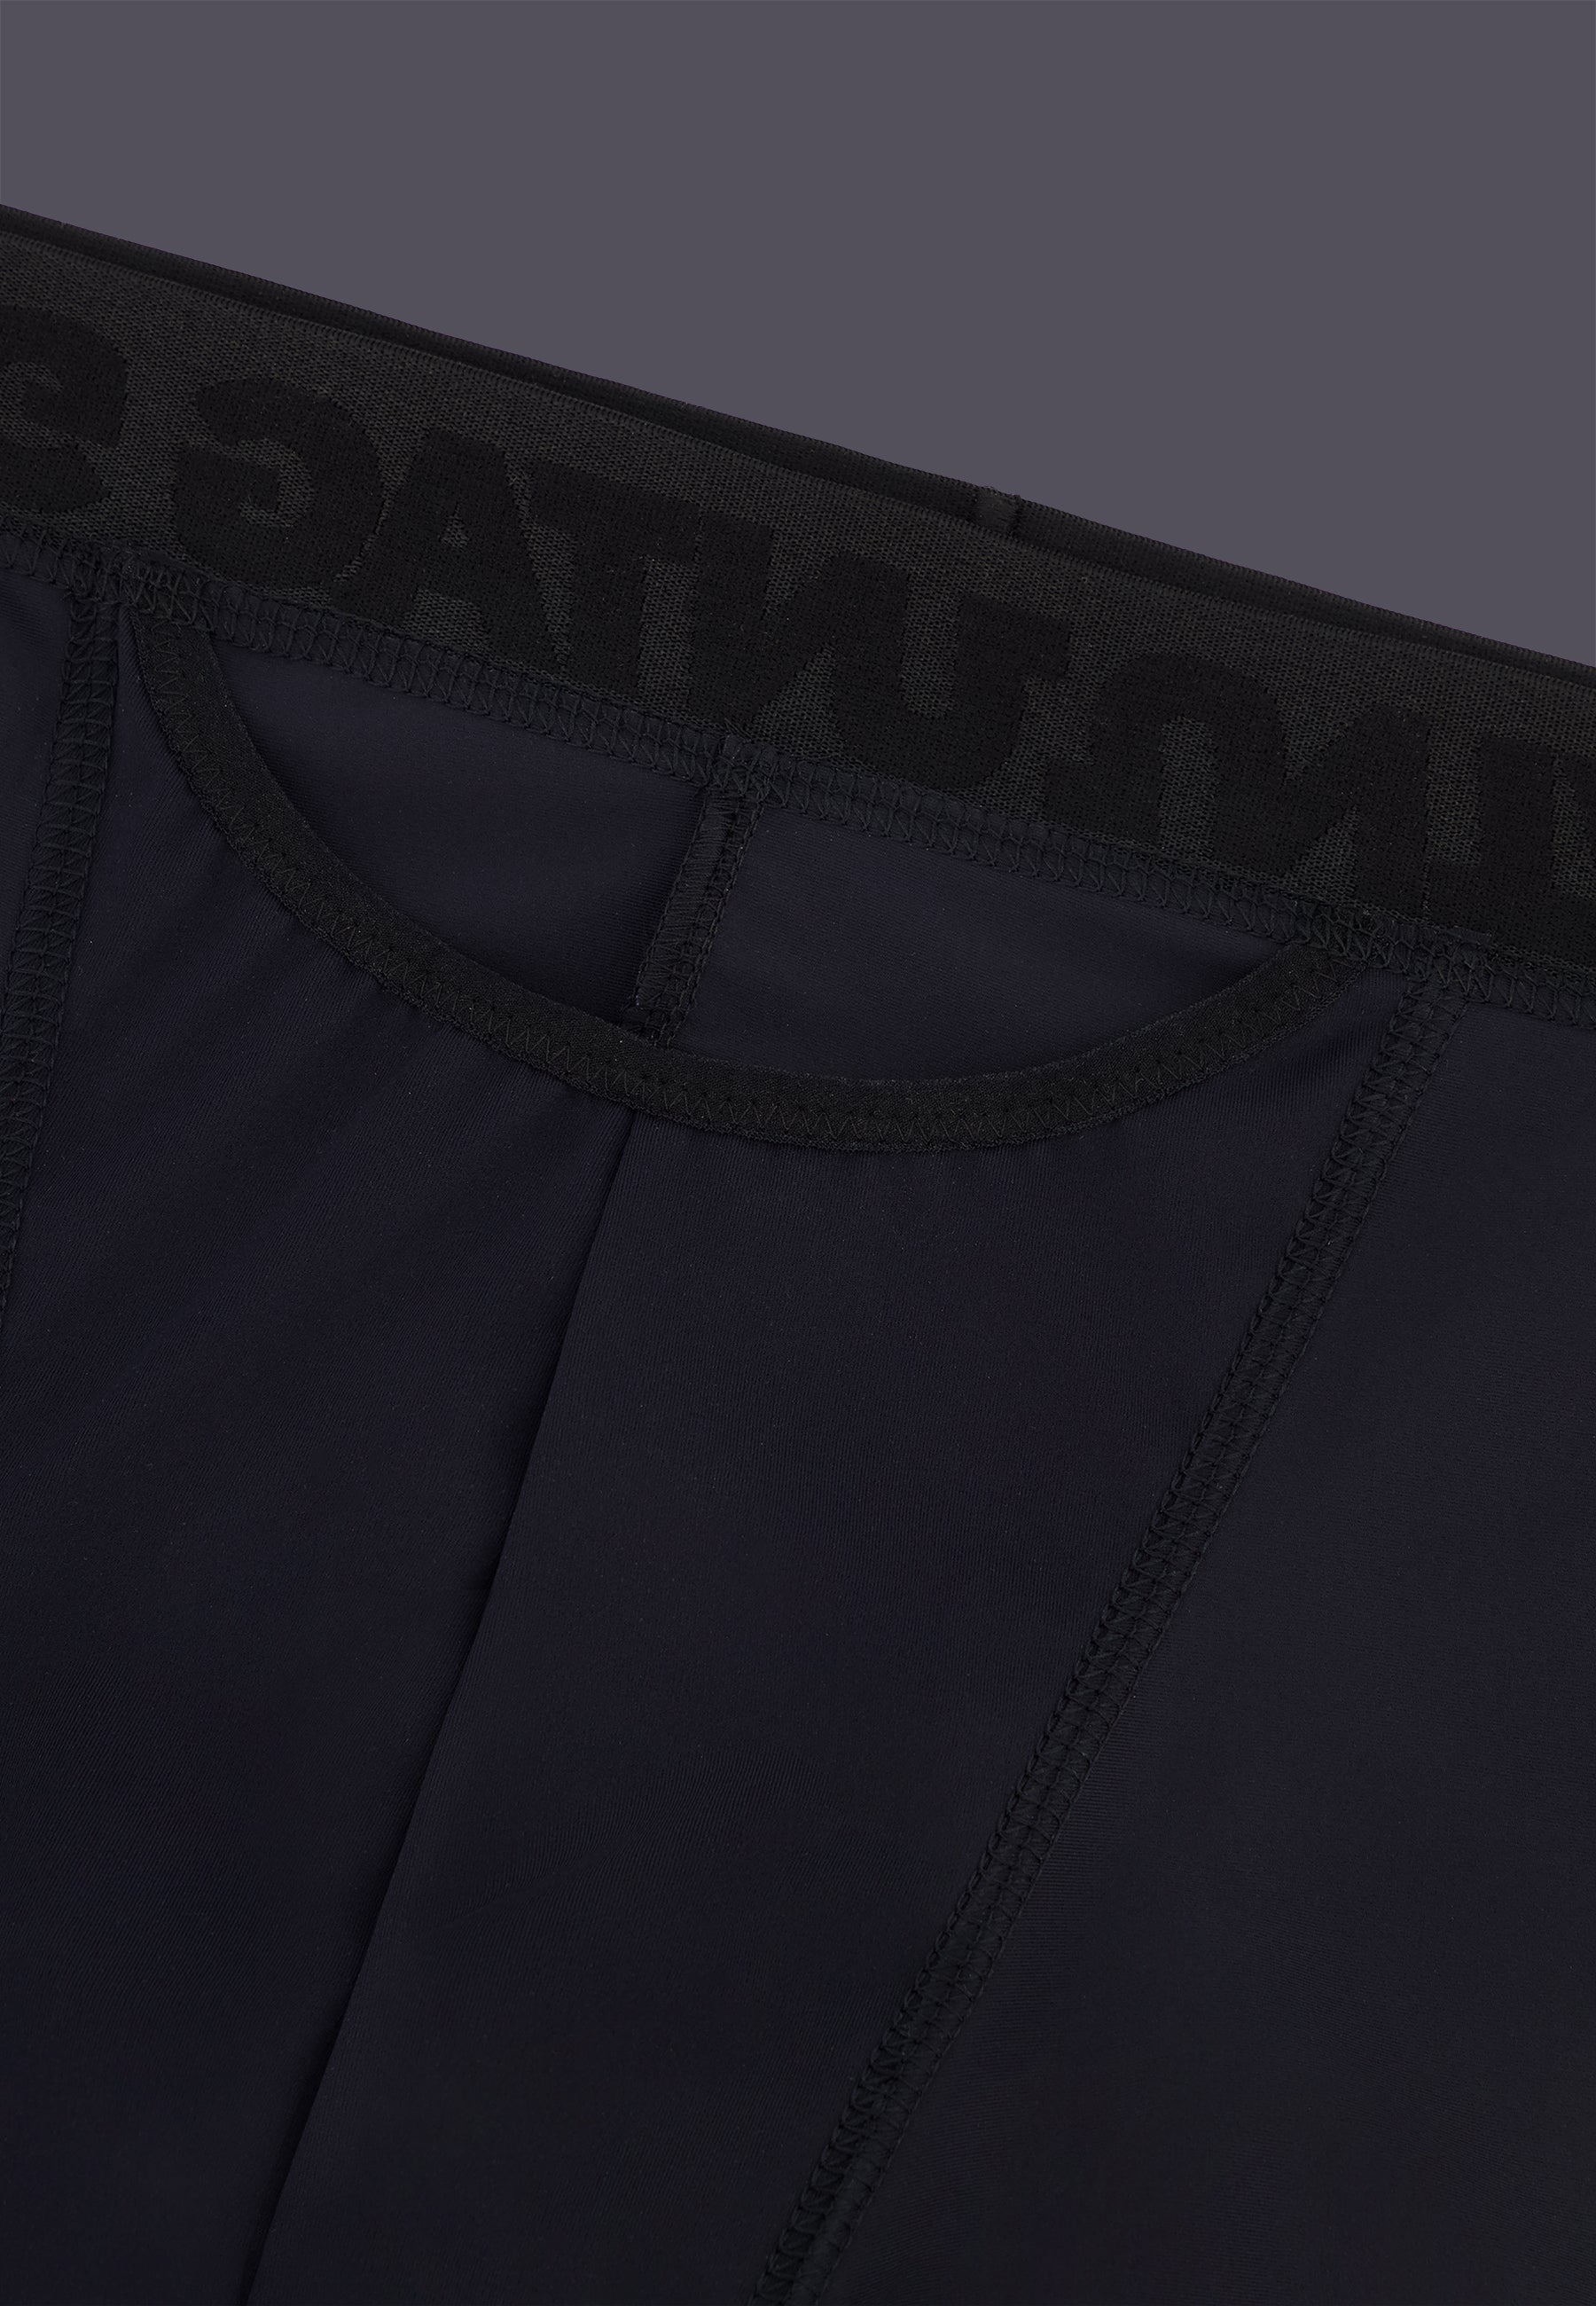 Detail of the packing pouch on the inside of the Boxershorts - by UNTAG